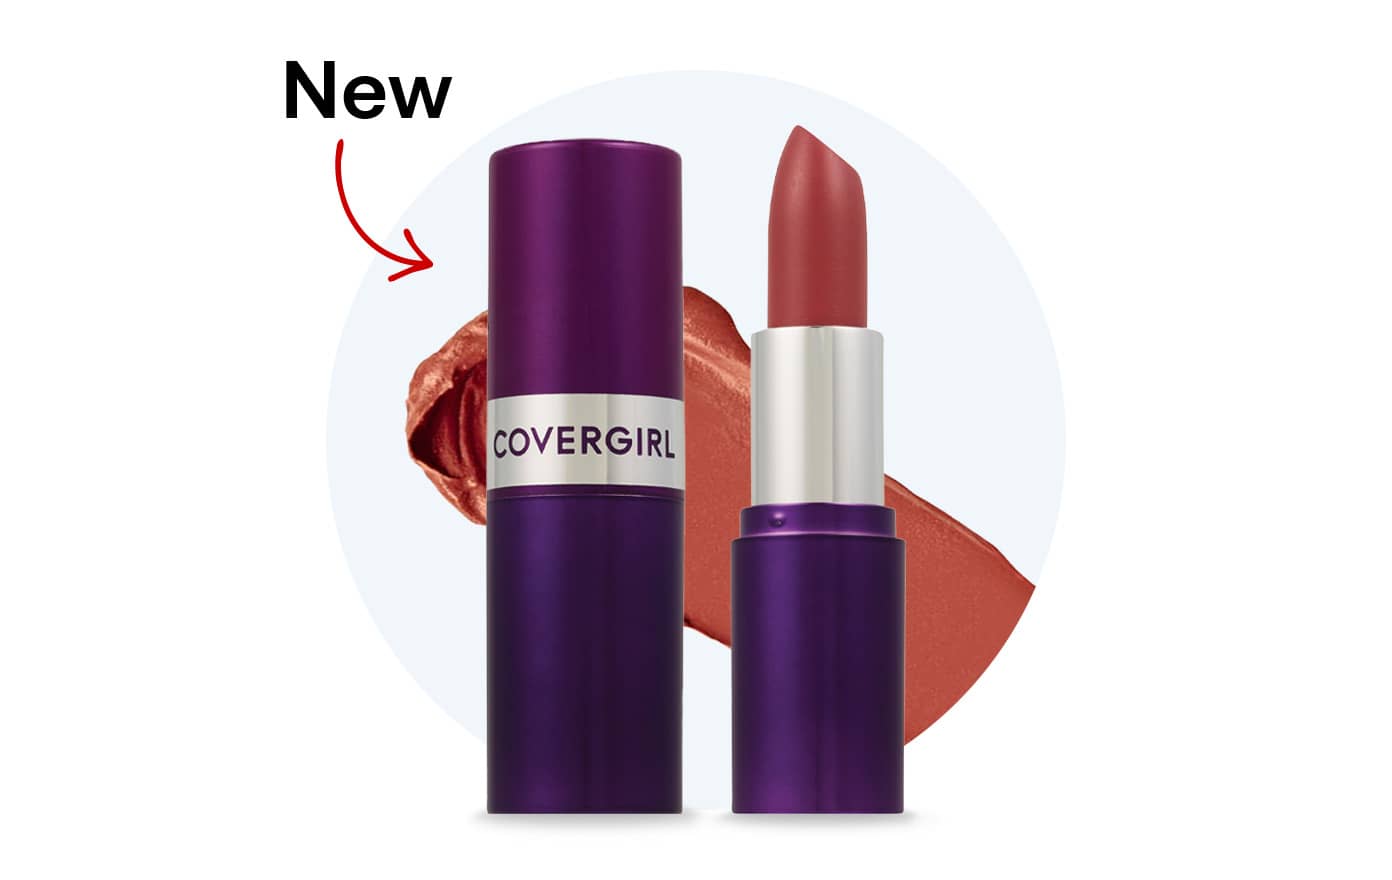 New, CoverGirl Simply Ageless lipstick